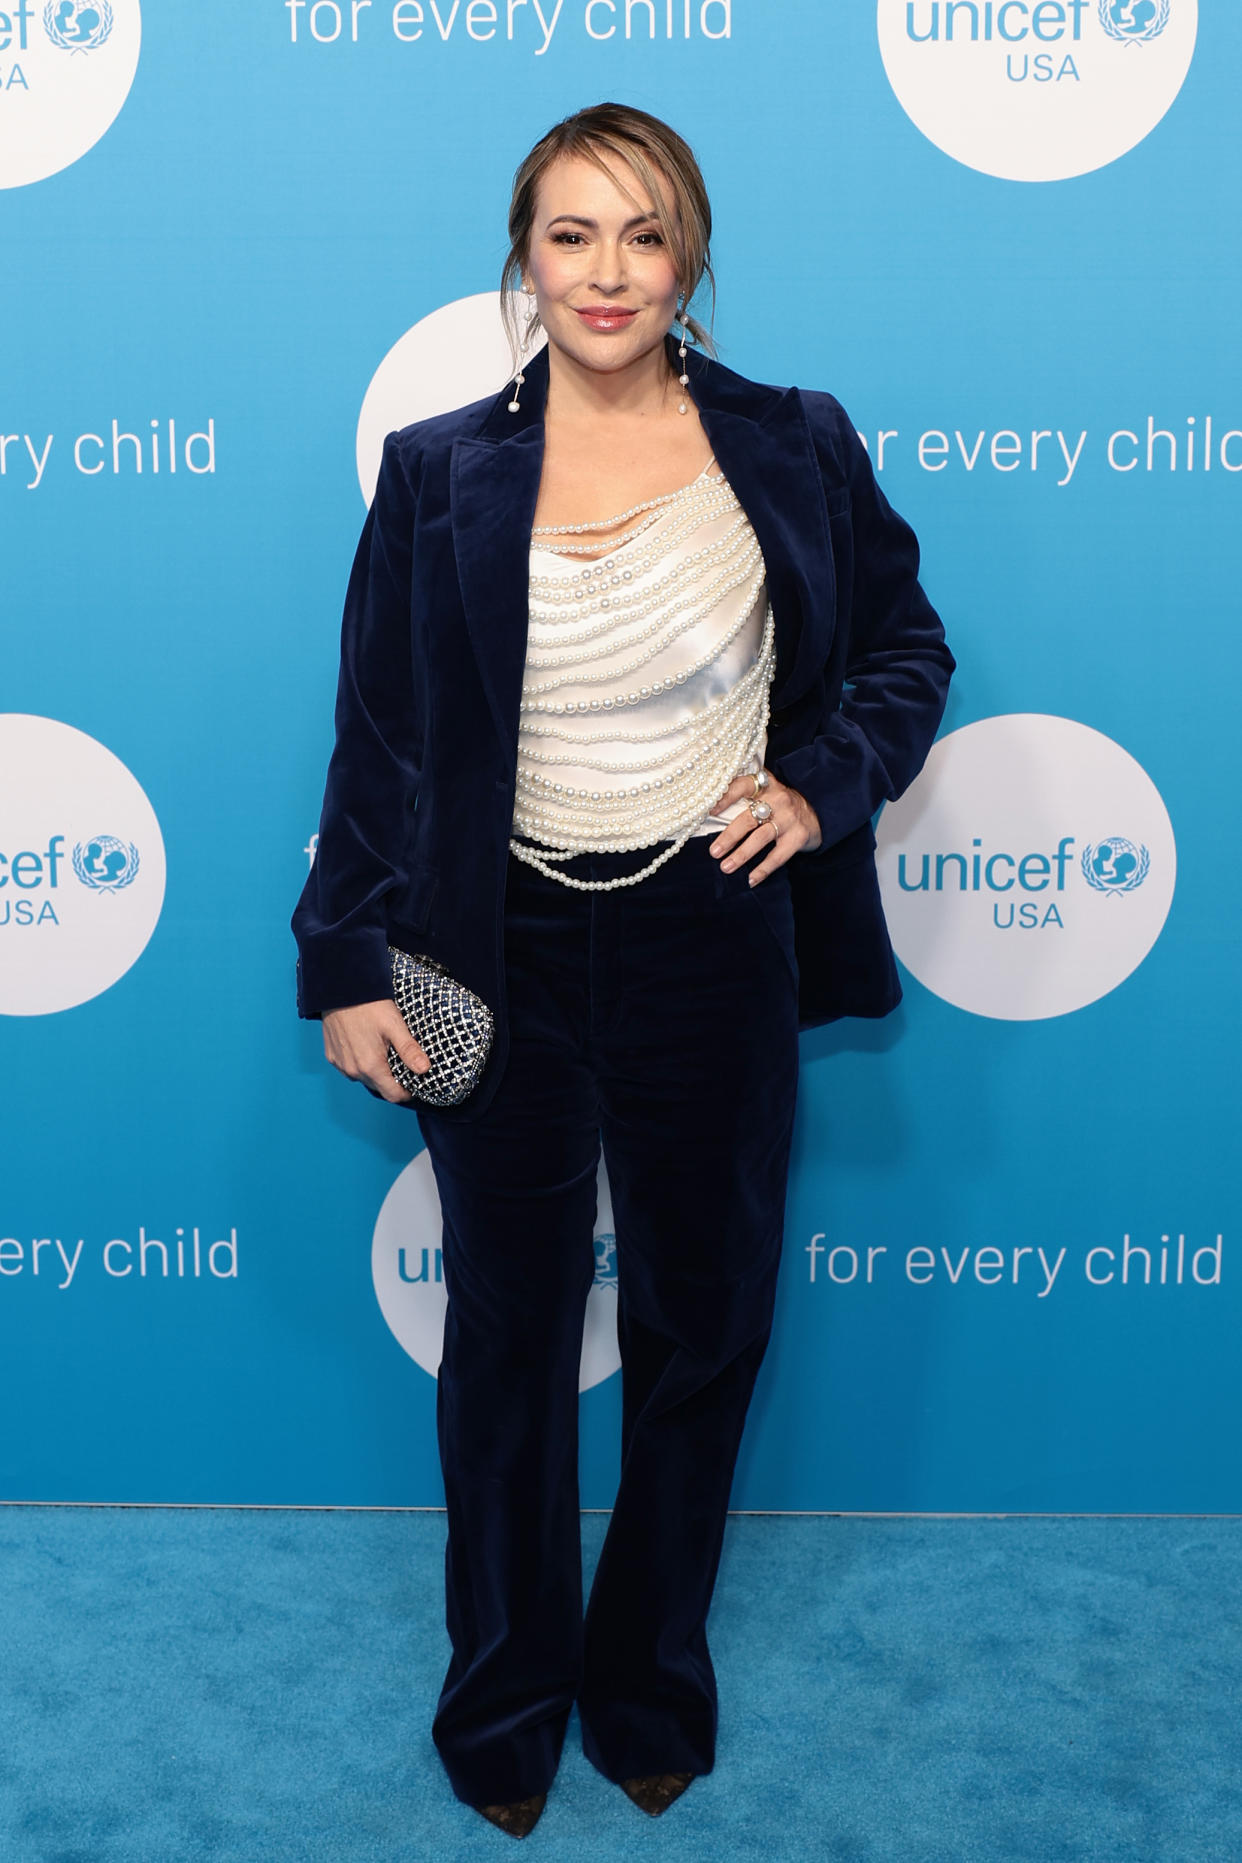 NEW YORK, NEW YORK - NOVEMBER 29: Alyssa Milano attends the 2022 UNICEF Gala at The Glasshouse on November 29, 2022 in New York City. (Photo by Dimitrios Kambouris/Getty Images)